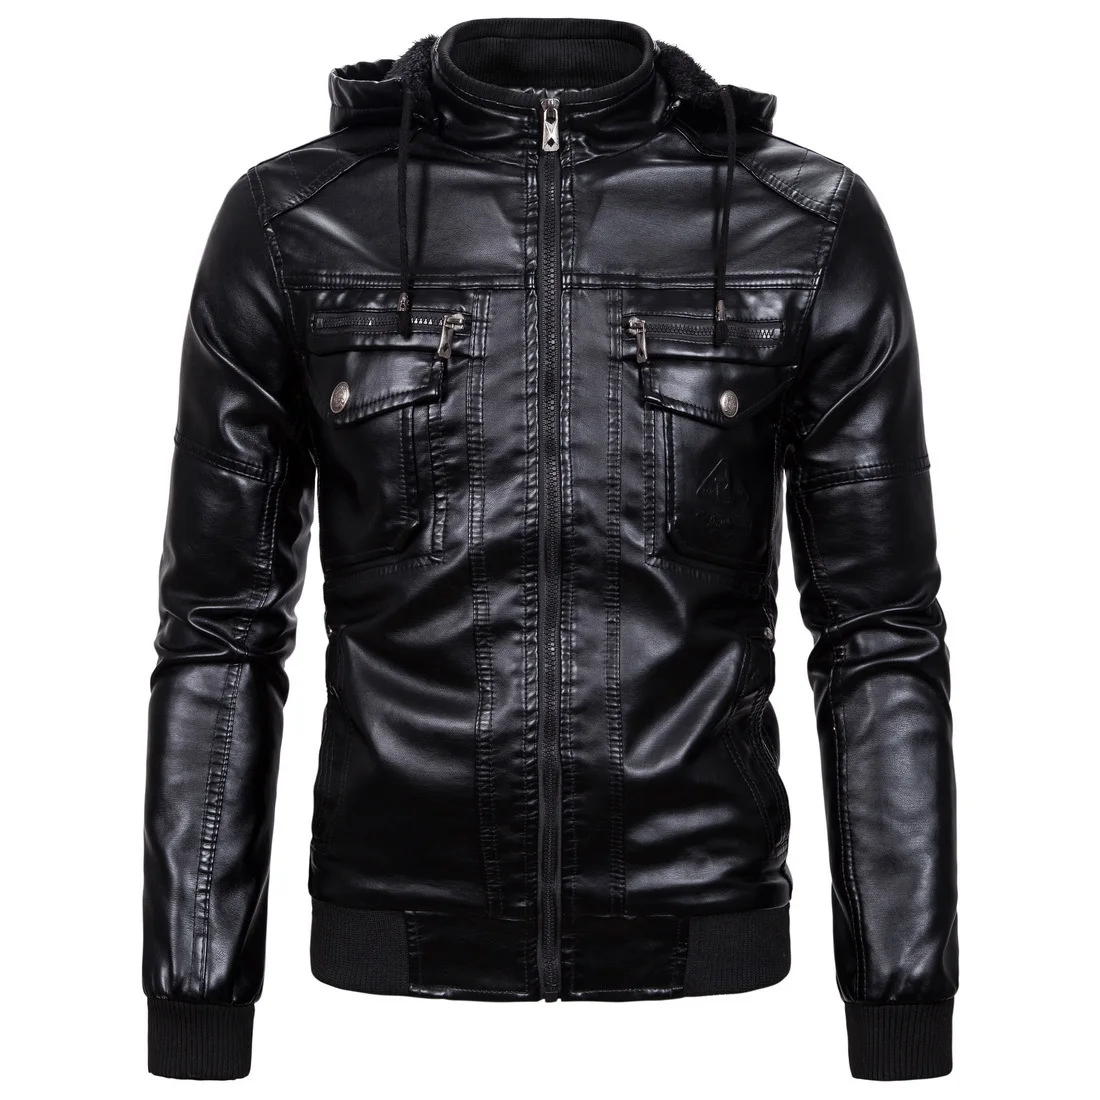 Men's Lapel Motorcycle Leather Jacket Multi-Pocket Casual Fit Leather Jacket Slim Fit Full Zip Long-Sleeve Leather Coat